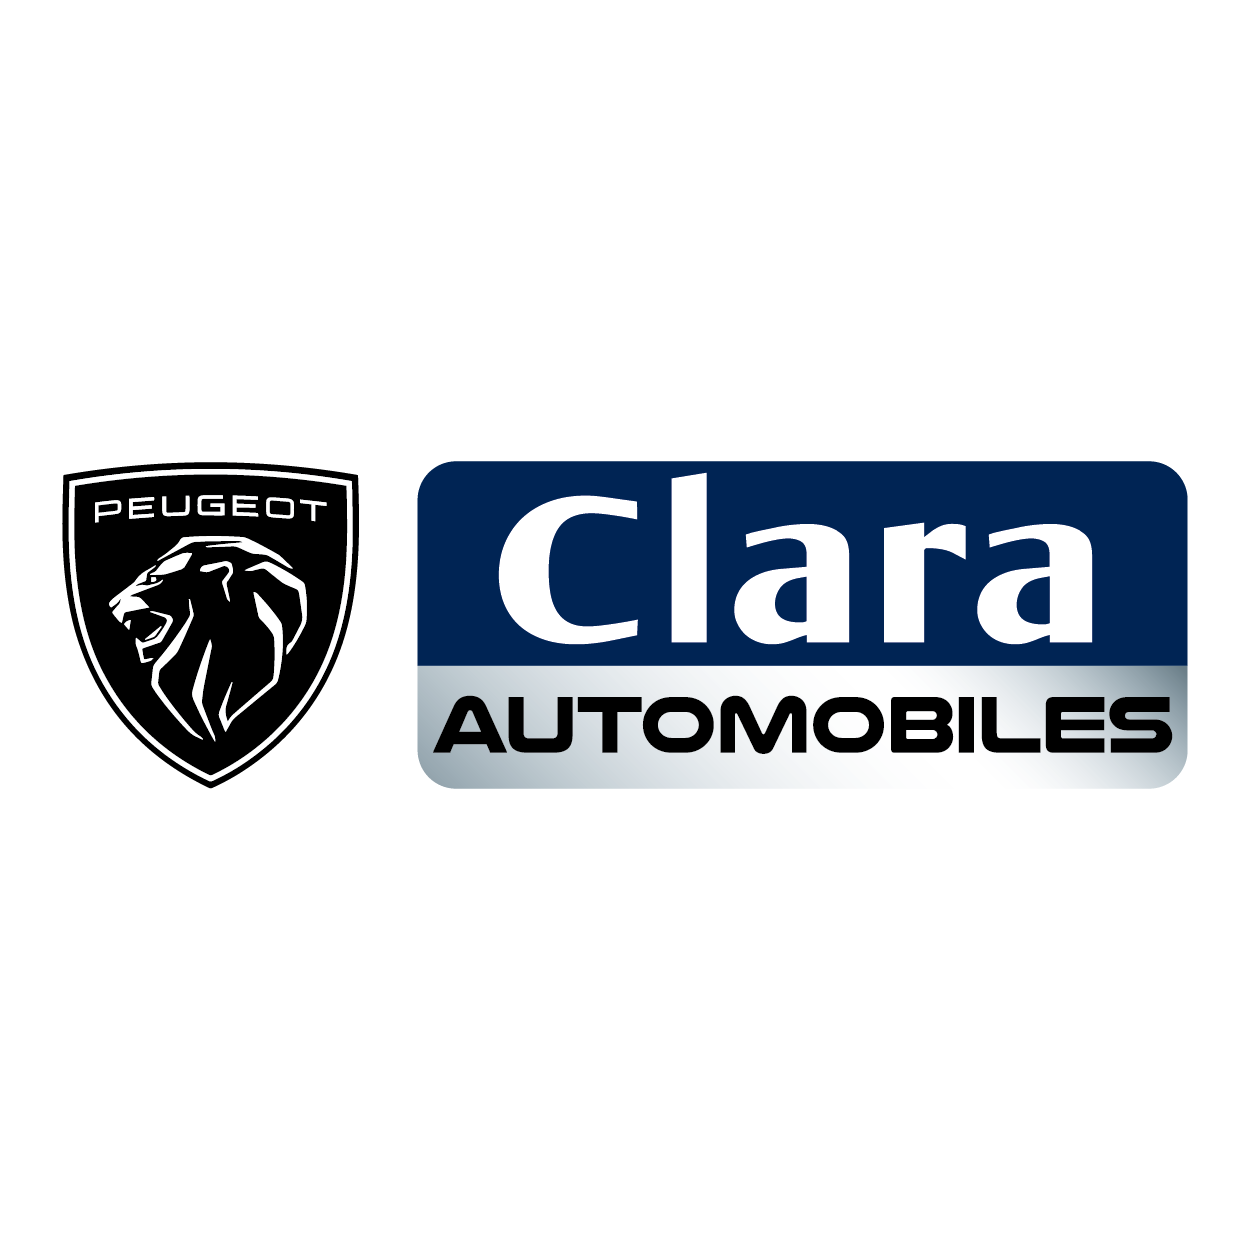 You are currently viewing ÉCO 24 – CLARA AUTOMOBILES